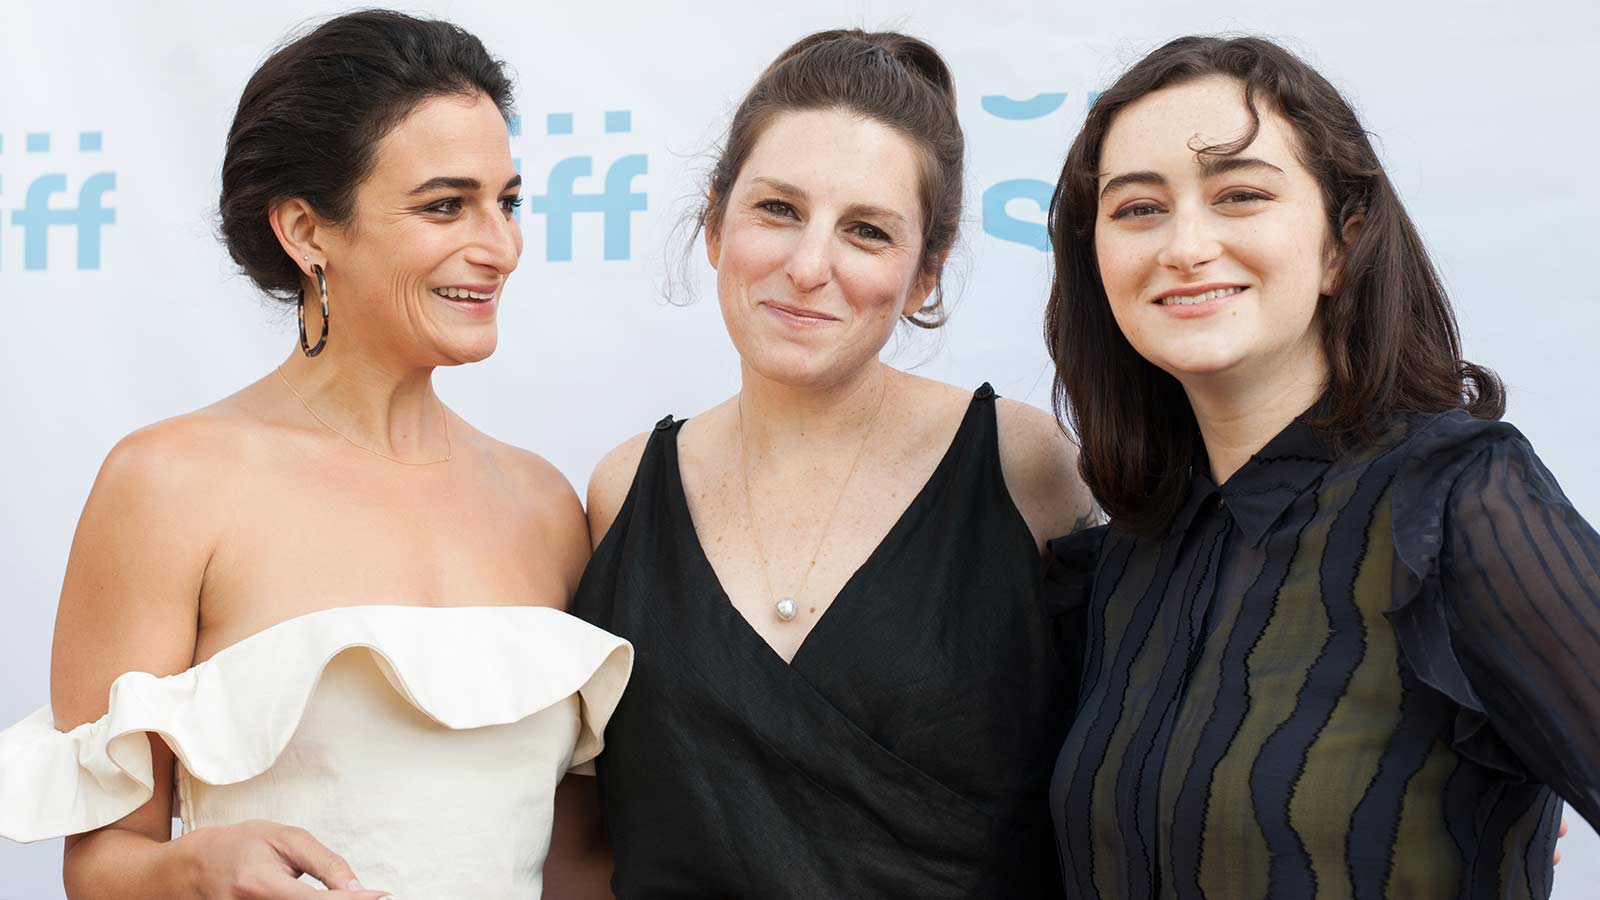 Actors Jenny Slate and Abby Quinn with Director Gillian Robespierre at the SIFF 2017 screening of Landline.